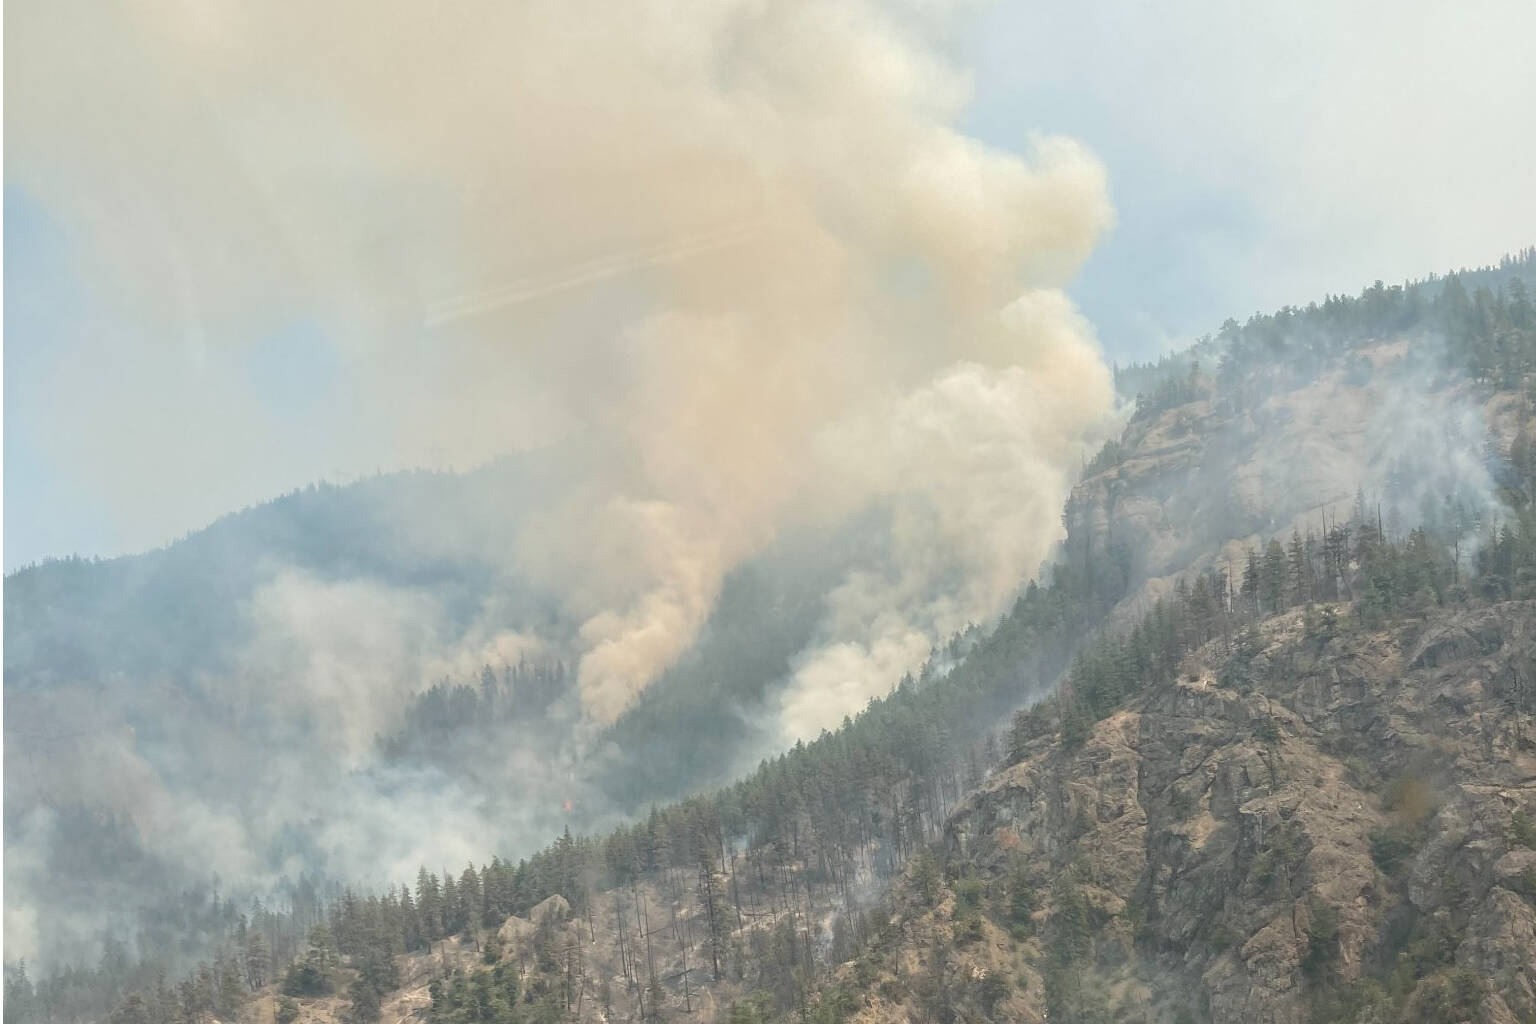 Keremeos Creek fire was estimated at 437 hectares as of Sunday (July 31) morning (Photo courtesy of BC Wildfire Service)